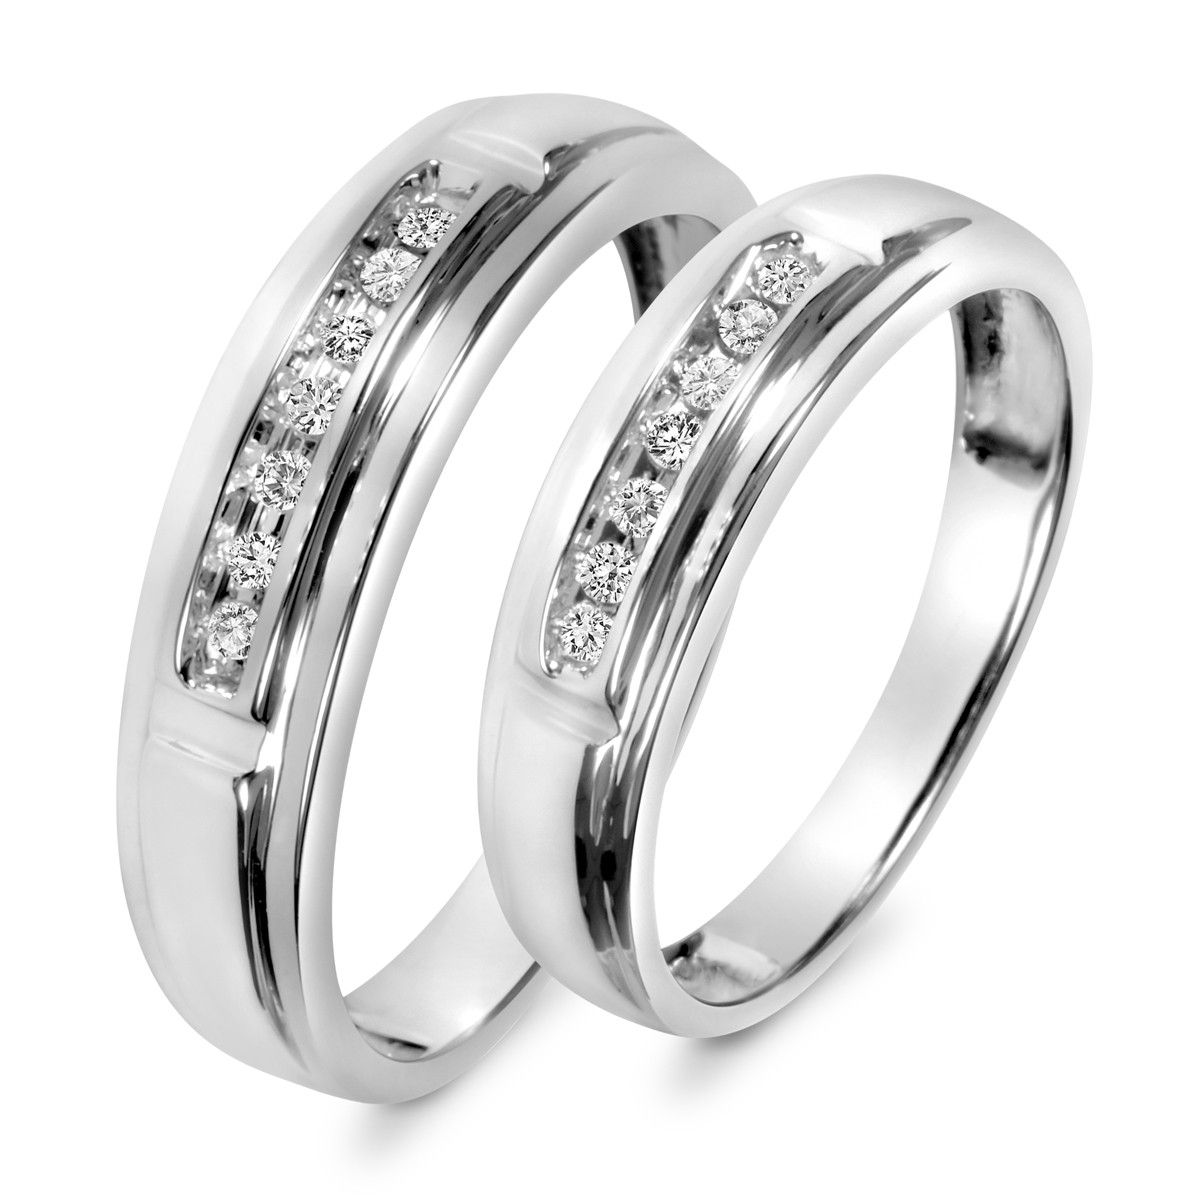 His And Hers Wedding Rings White Gold
 1 1 8 Carat T W Diamond His And Hers Wedding Band Set 10K